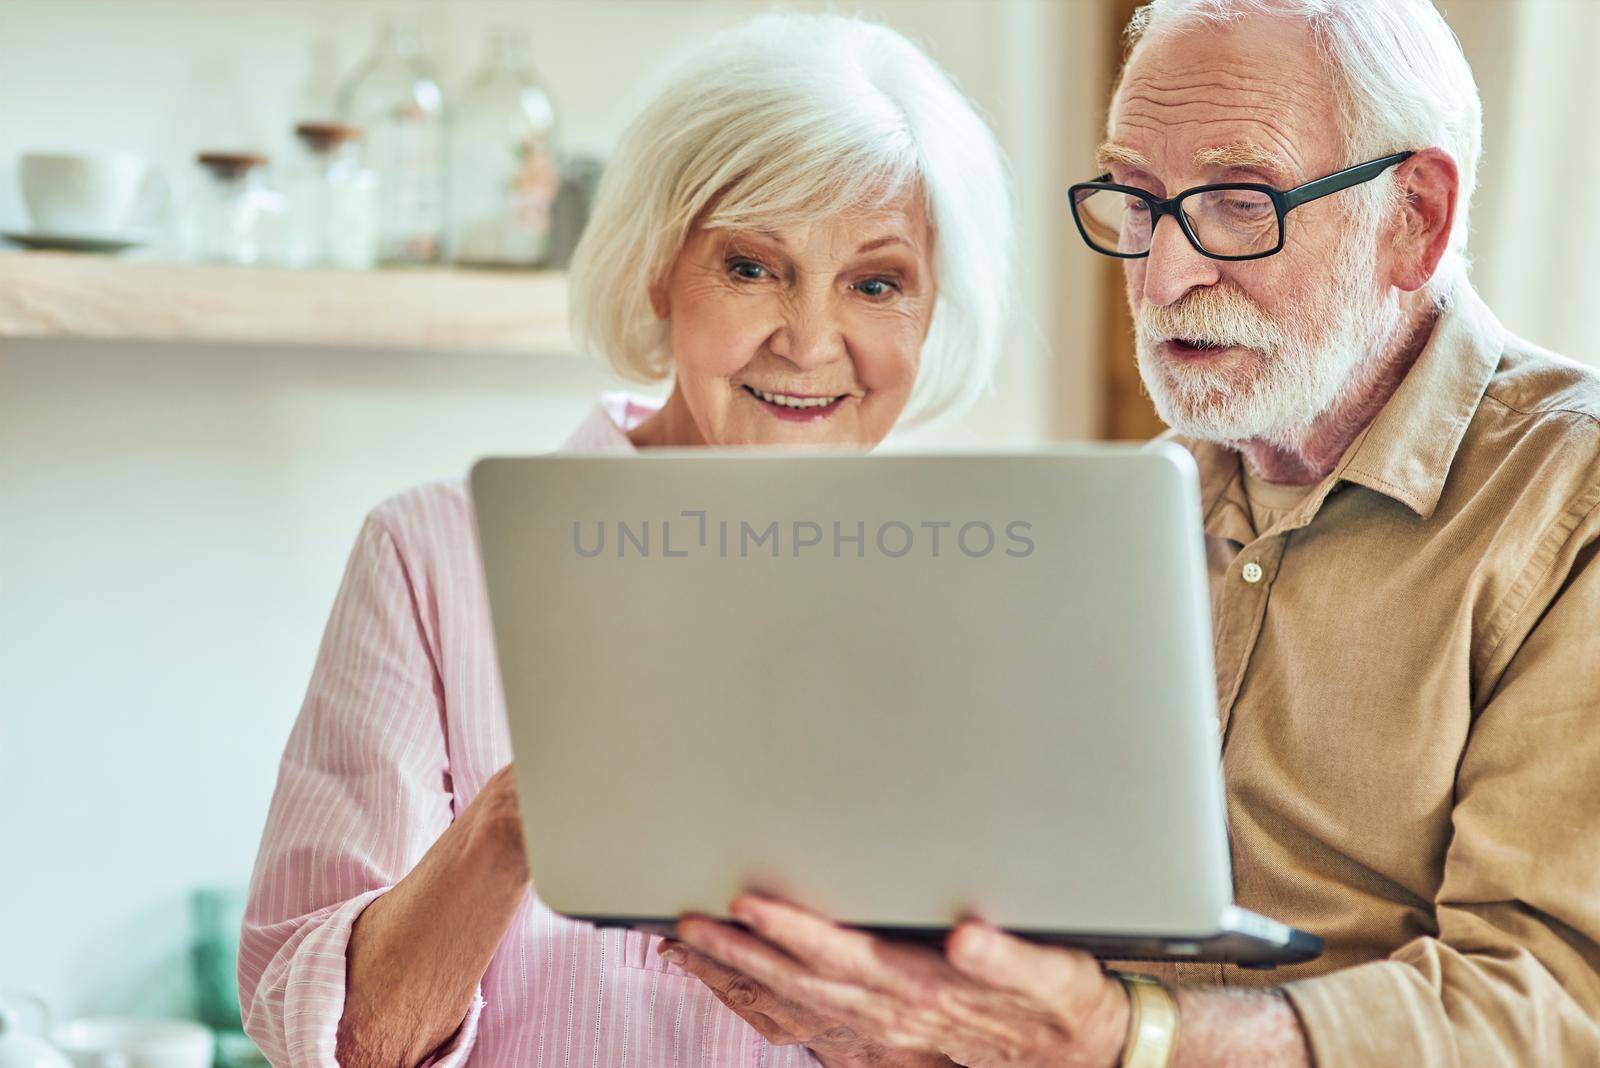 Waist up of elderly couple standing together and holding laptop in hands while looking at screen. Lifestyle concept